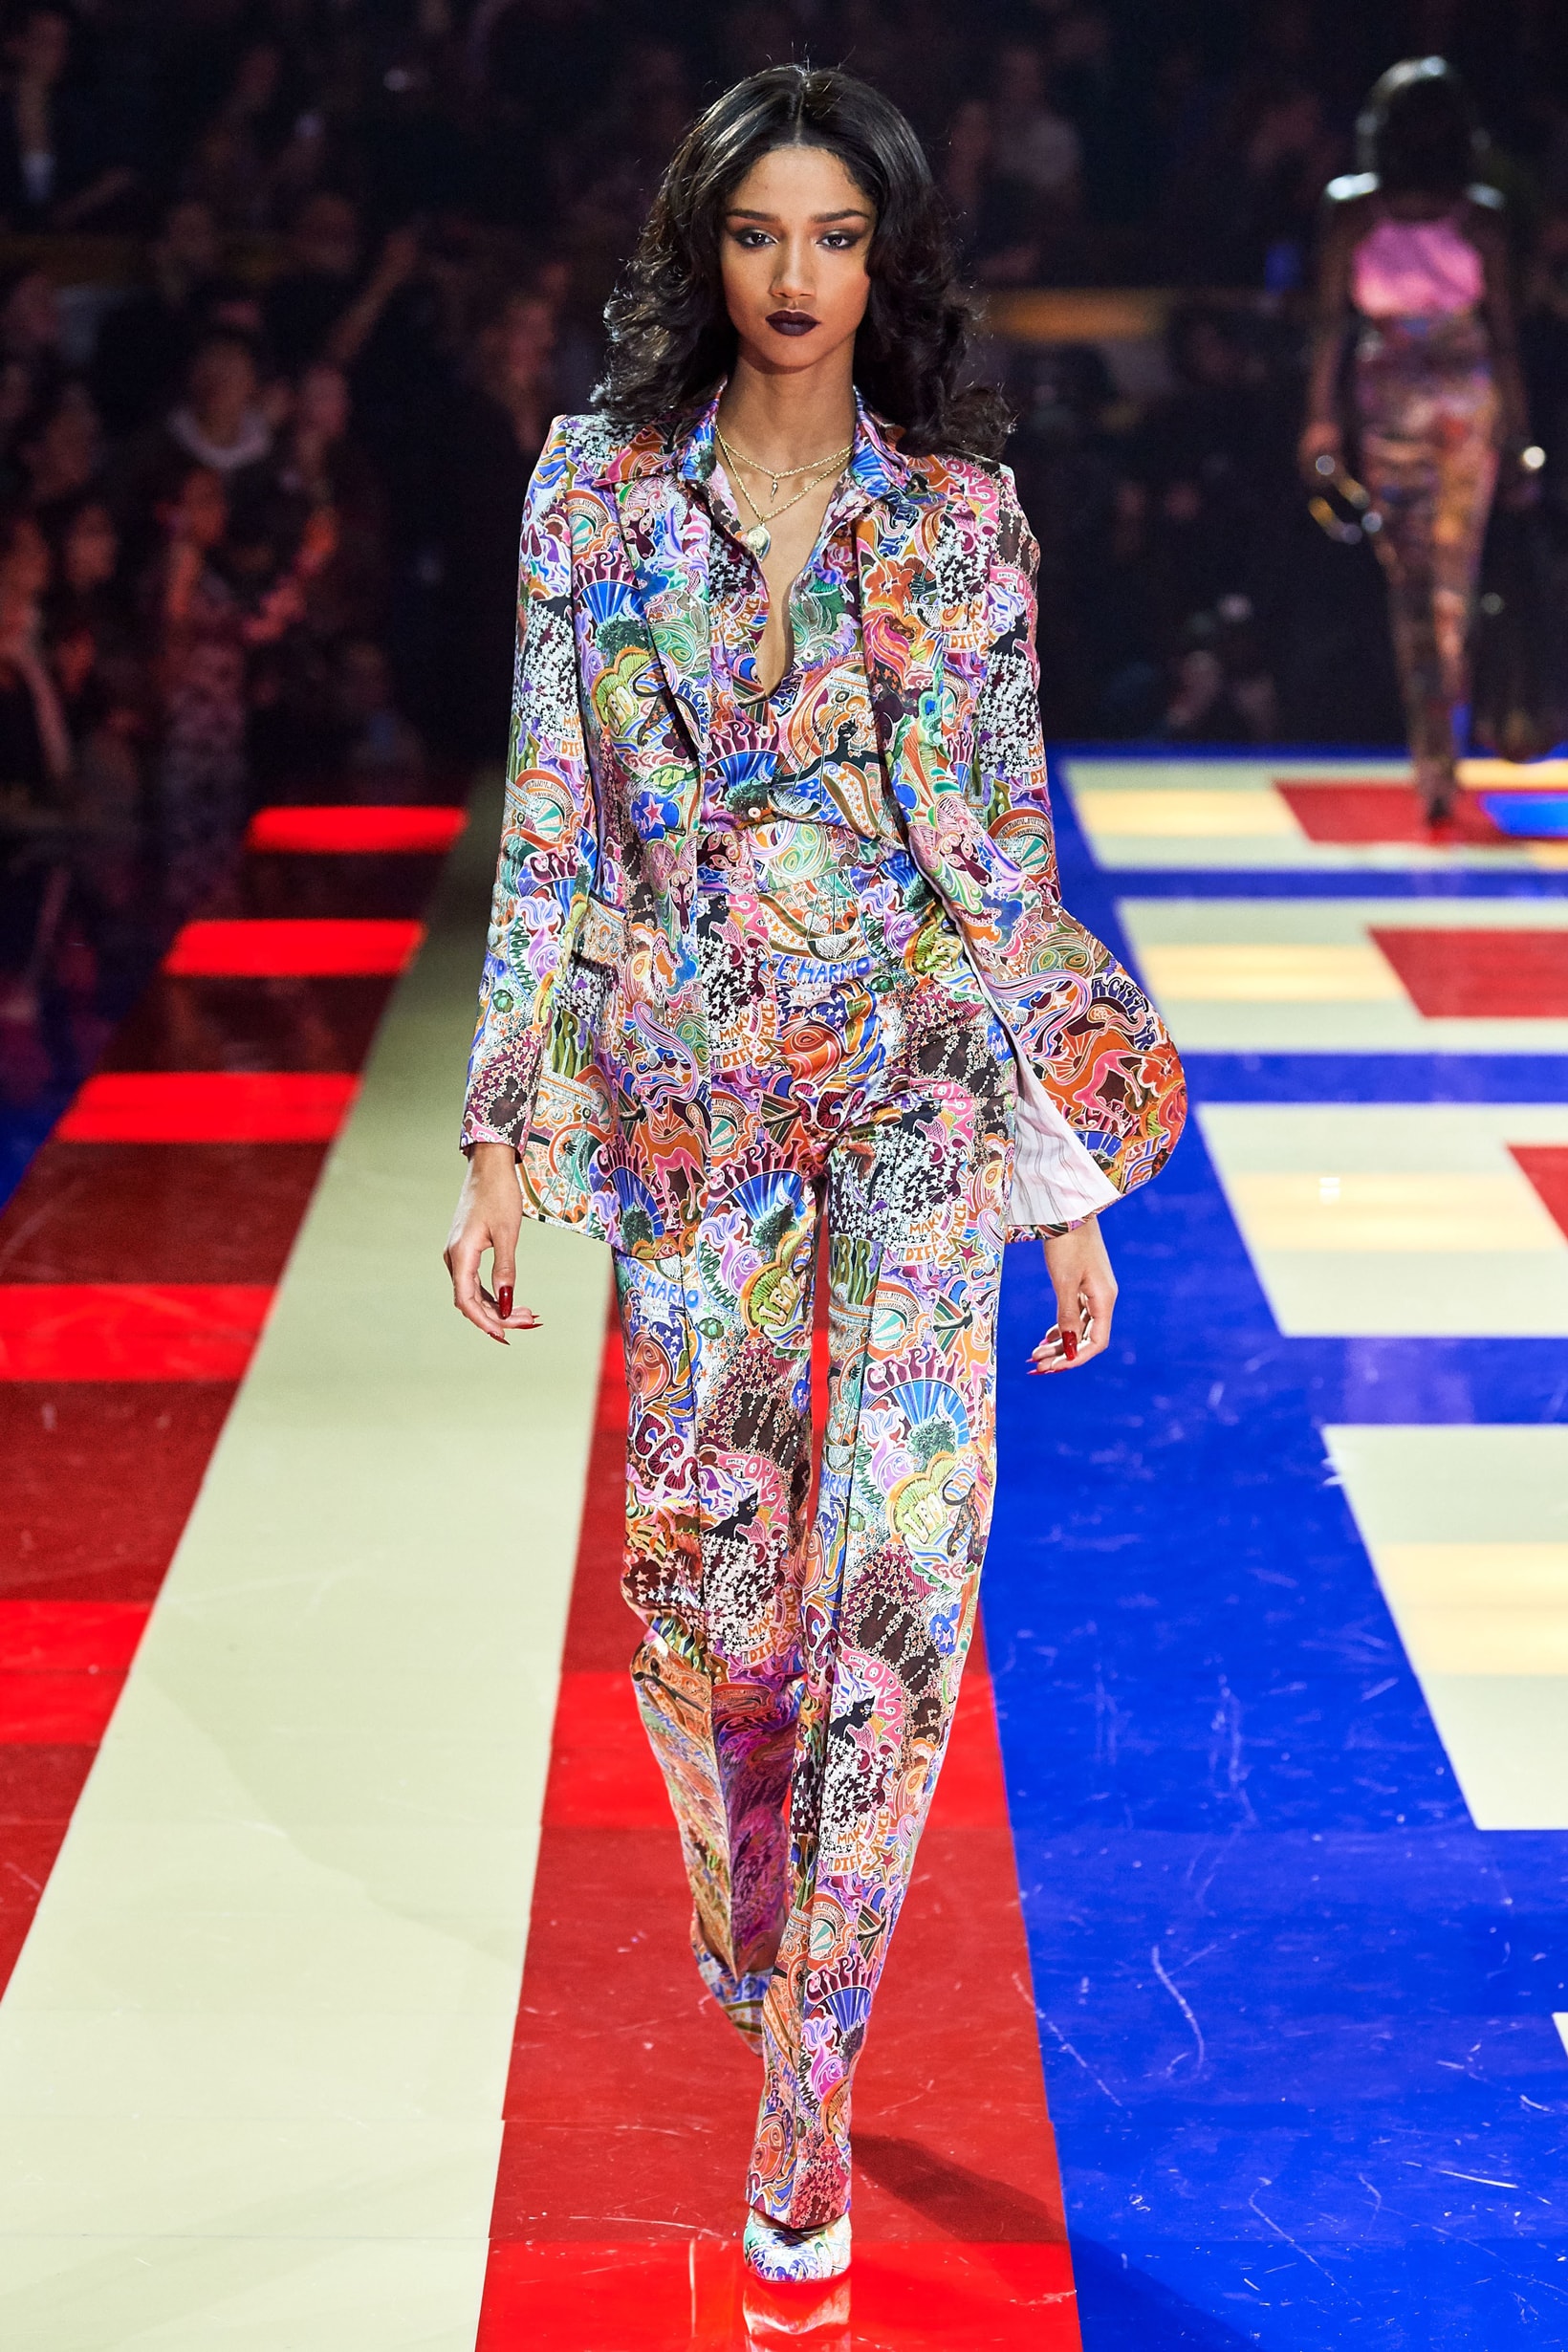 Tommy Hilfiger TommyNow Zendaya Spring 2019 Paris Fashion Week Show Collection Patterned Suit White Pink Blue